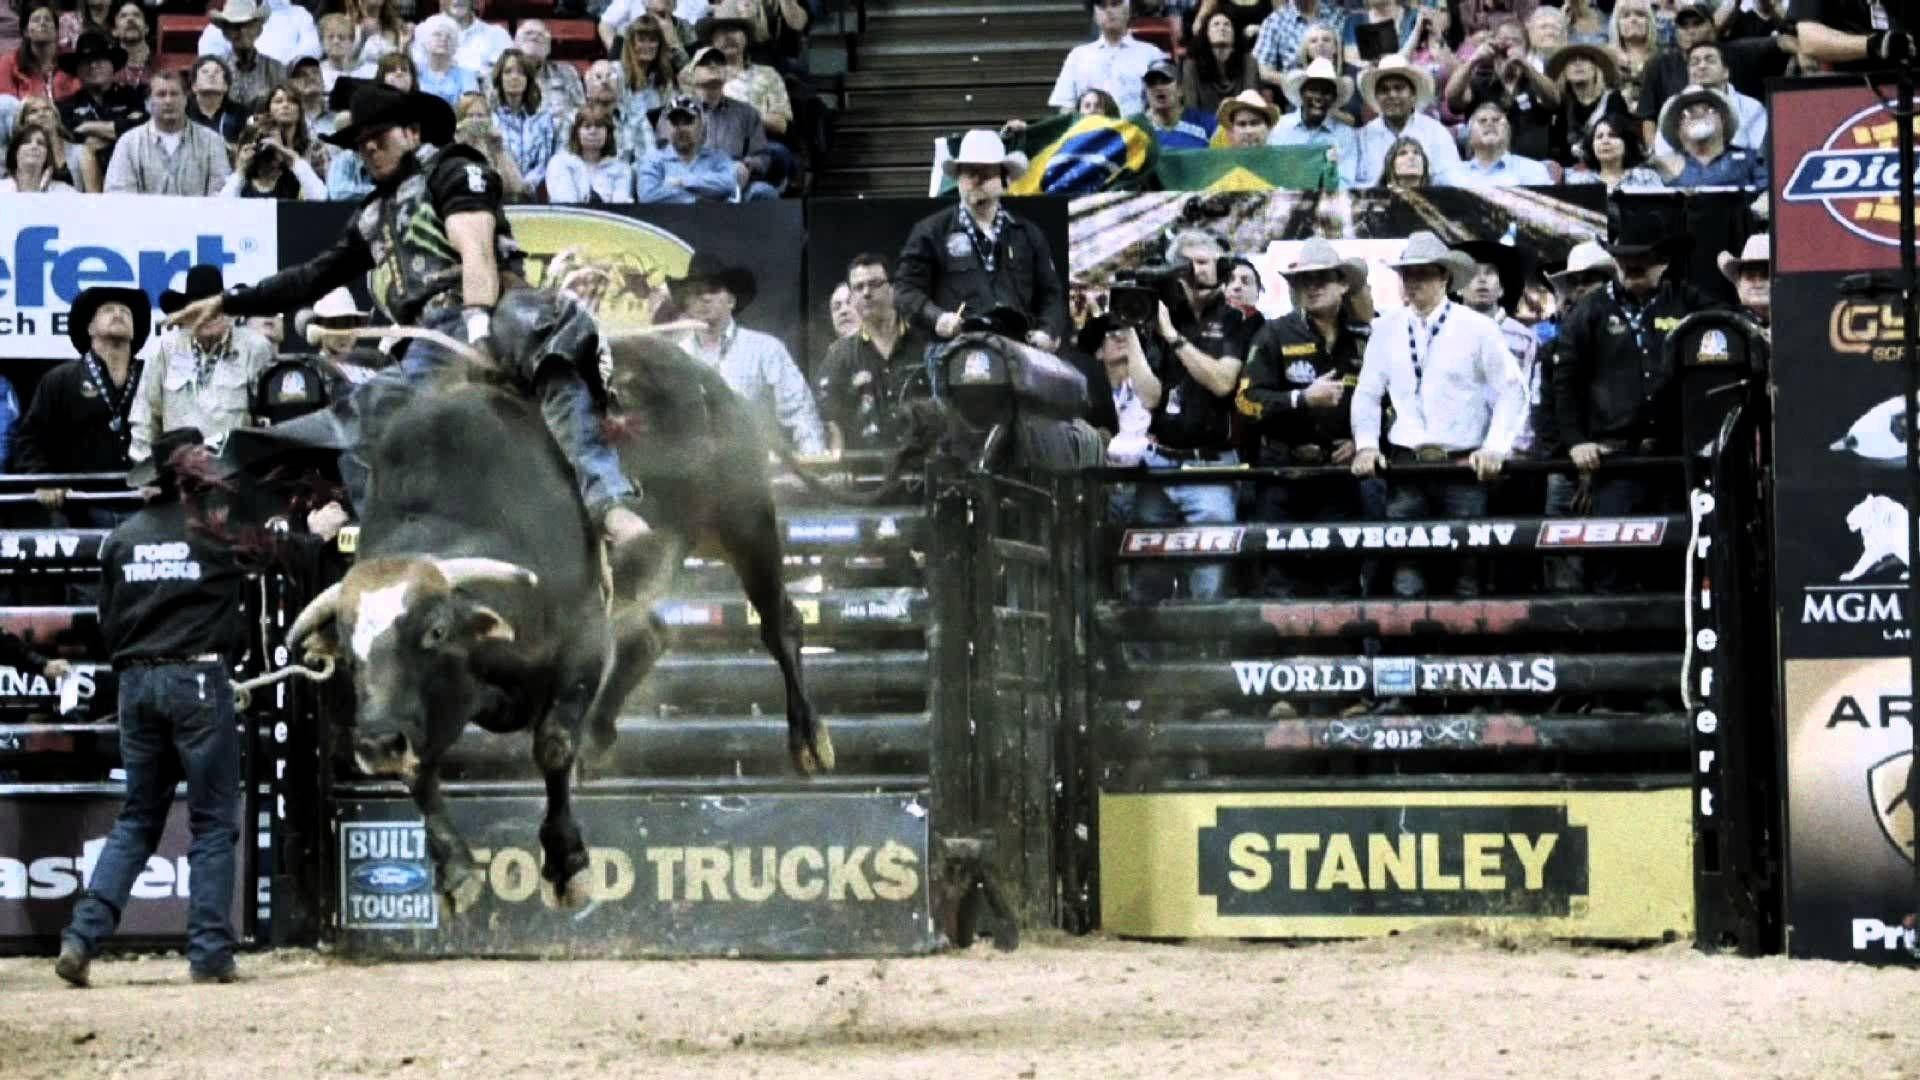 Bull Riding: A thrilling activity that isn't for the faint of heart Wallpaper